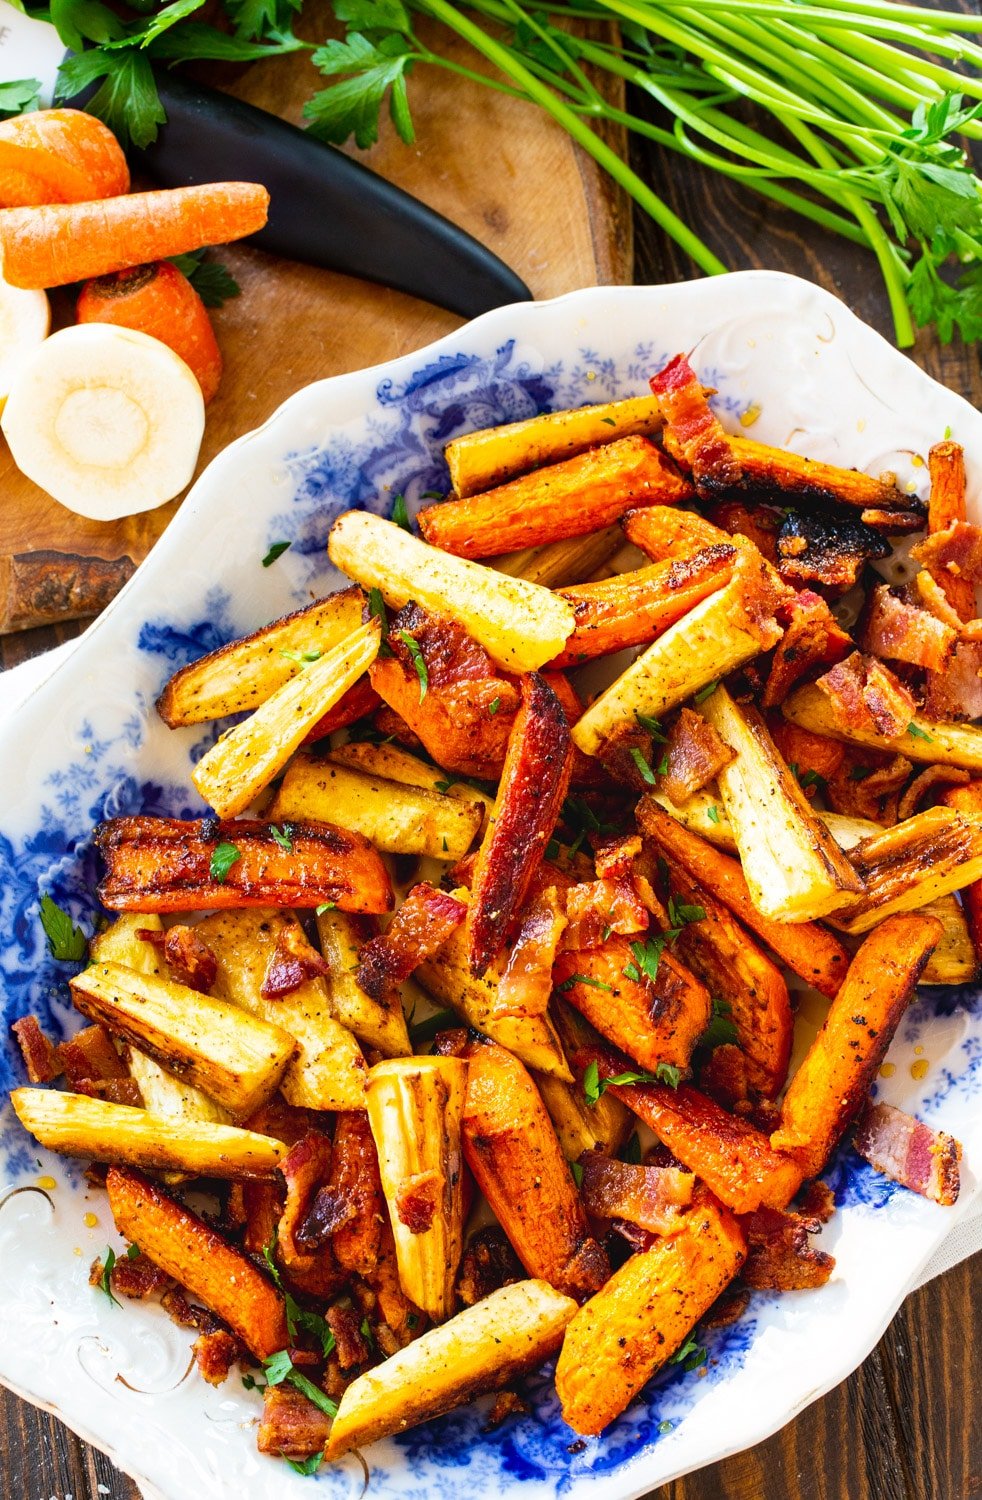 Roasted Carrots and Parsnips on platter with fresh carrots and parsnips next to it.